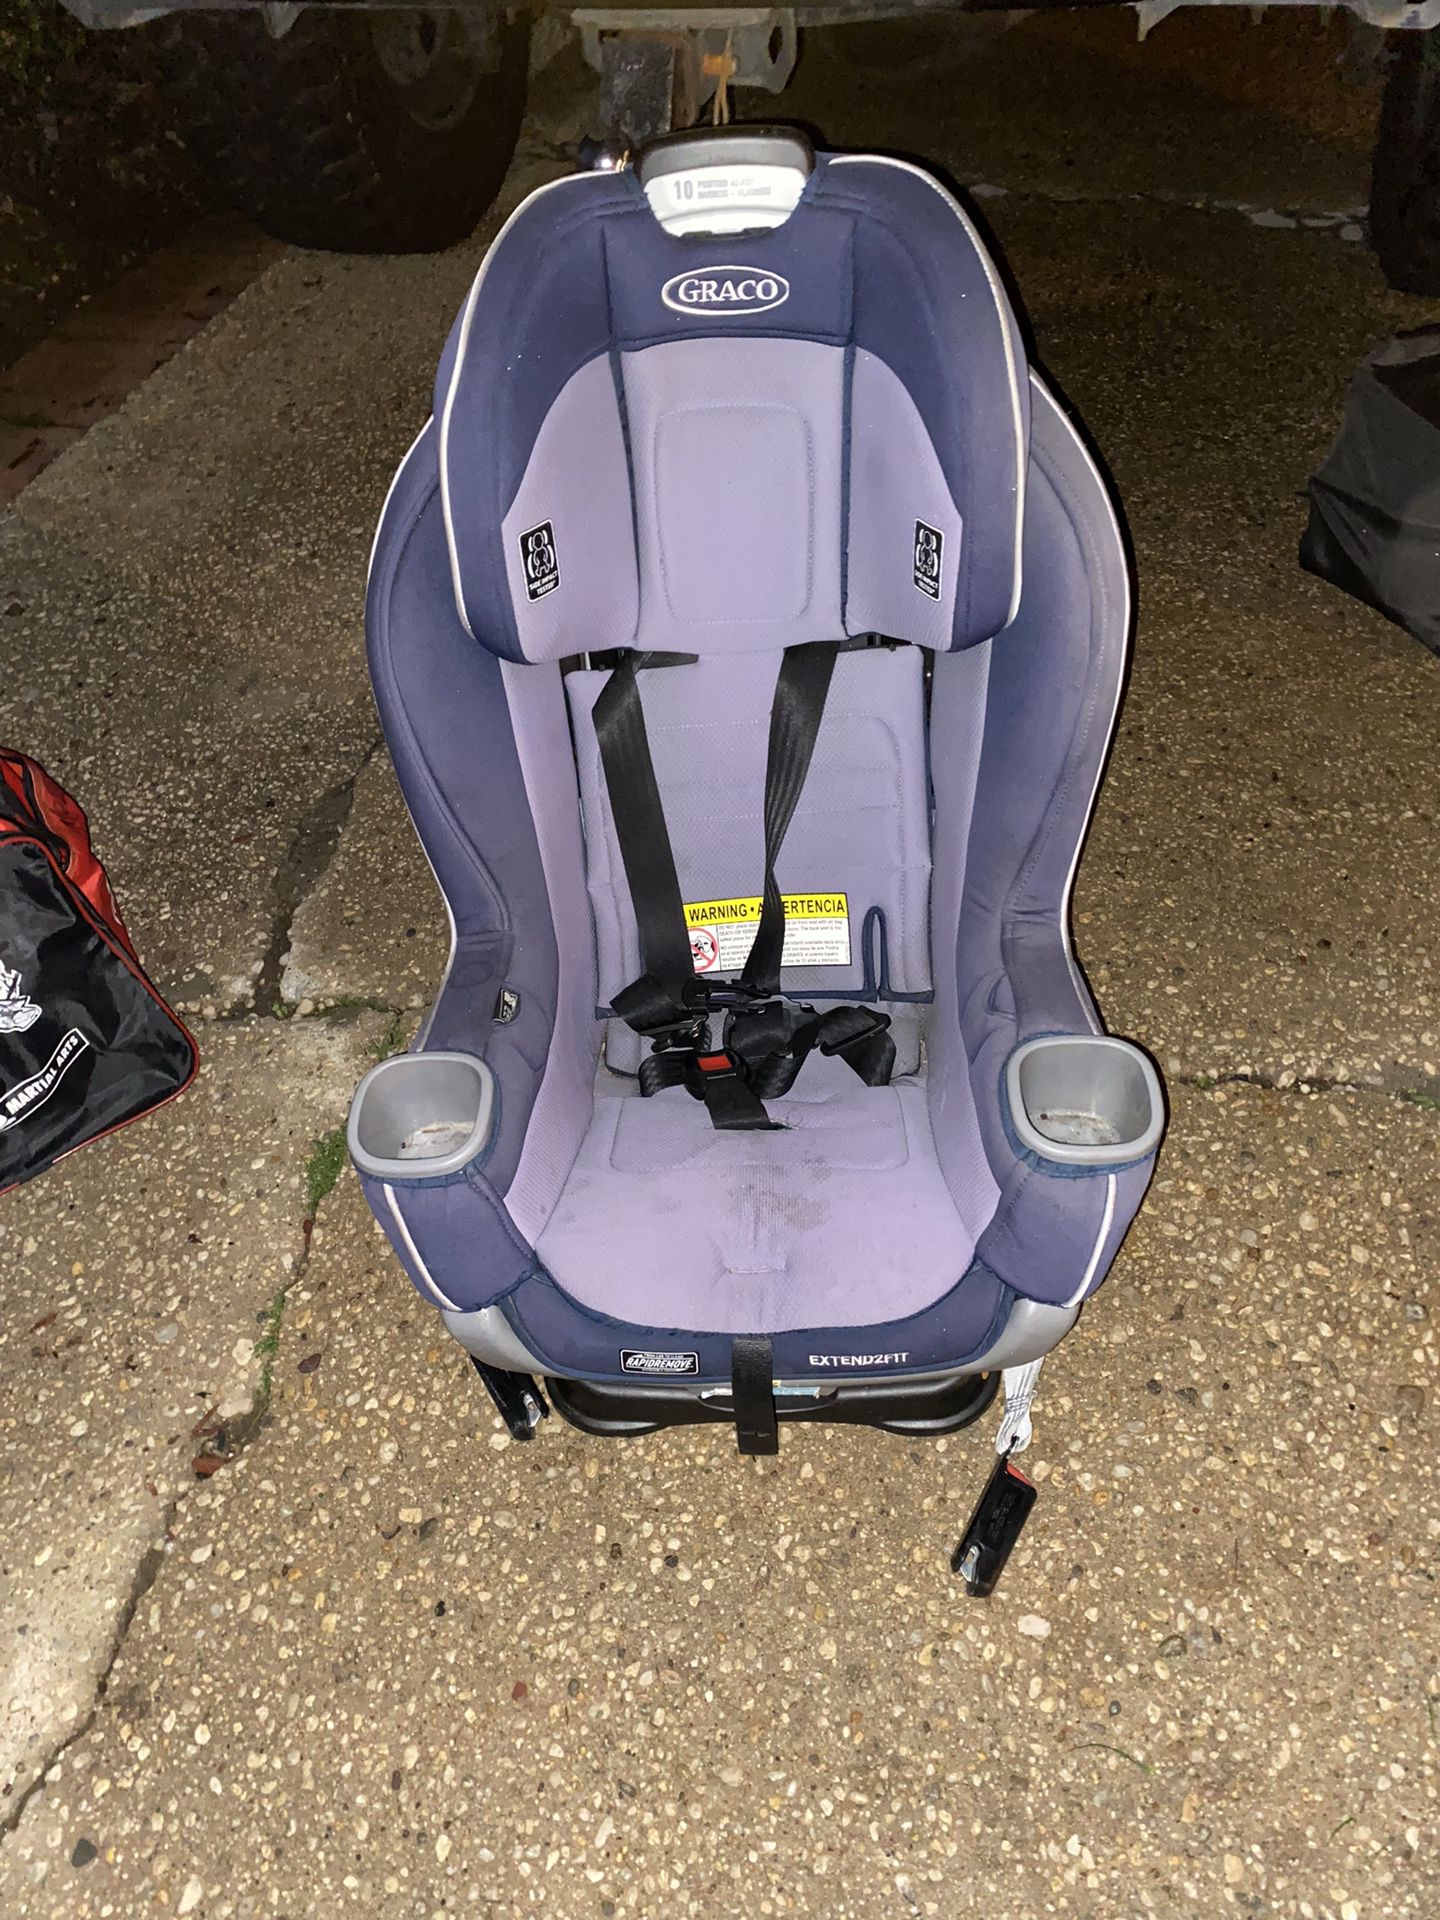 Graco Extens2Fit Convertible Car Seat